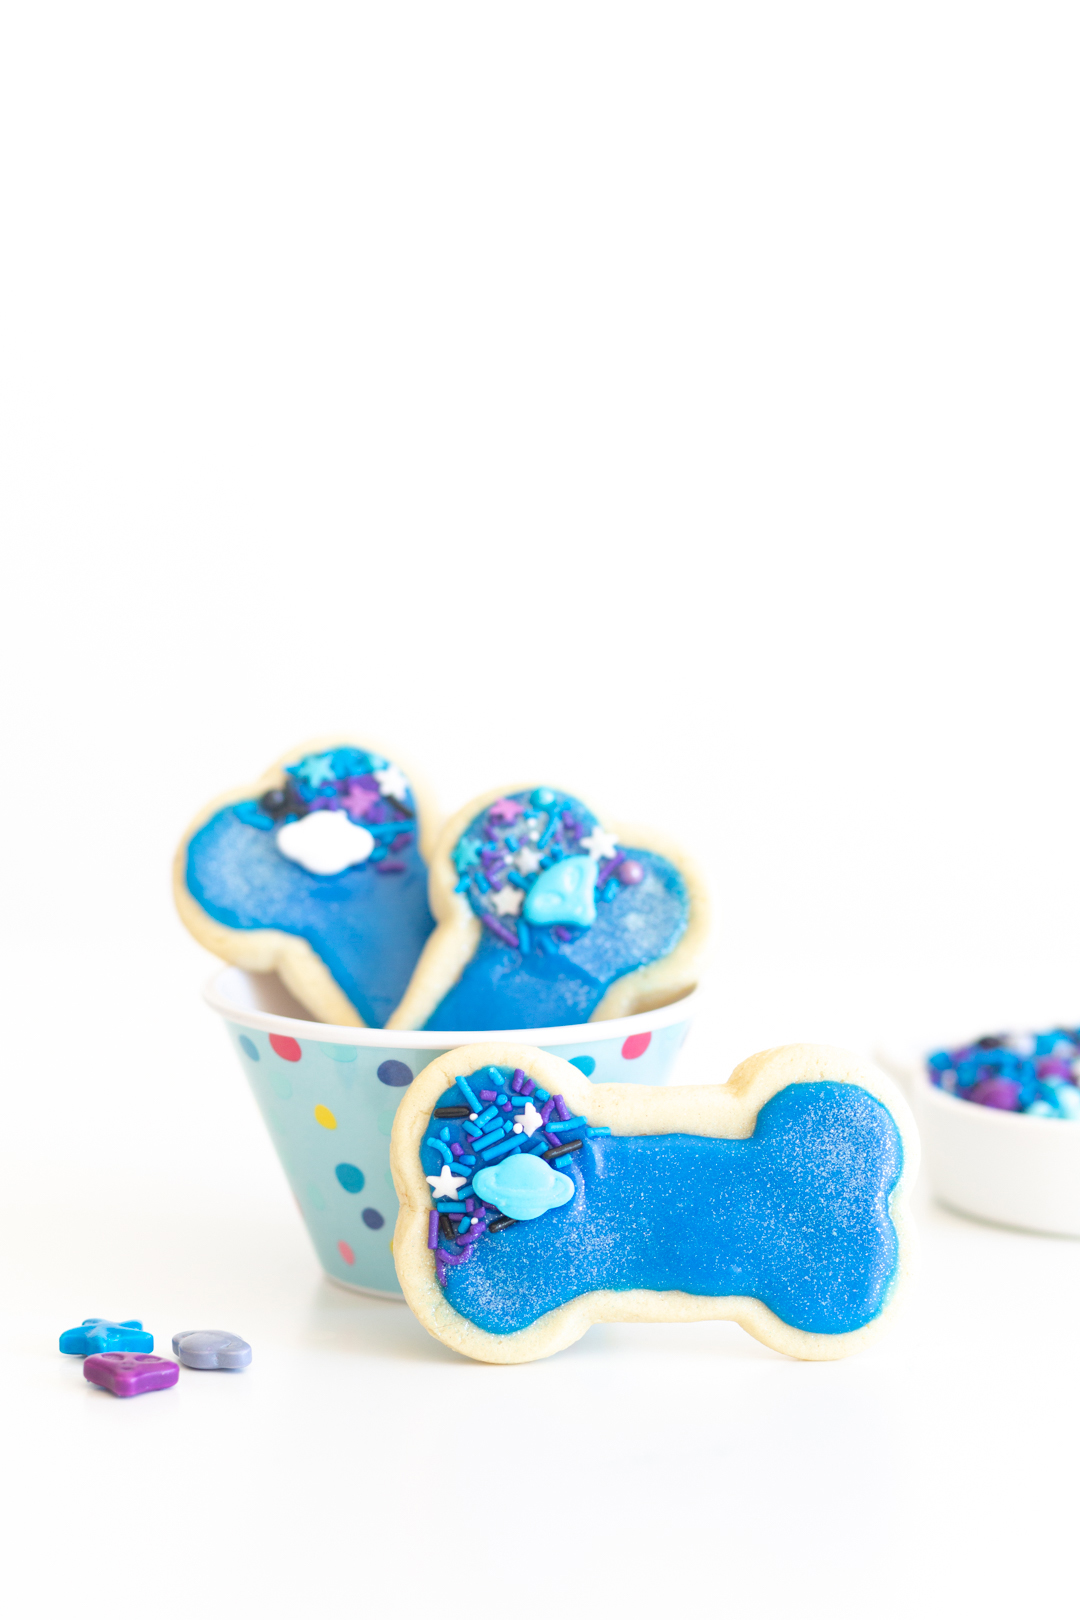 galaxy dog bone cookies with bright blue icing and alien sprinkles. Cookies placed in blue polkadot bowl with one leaning outside the bowl